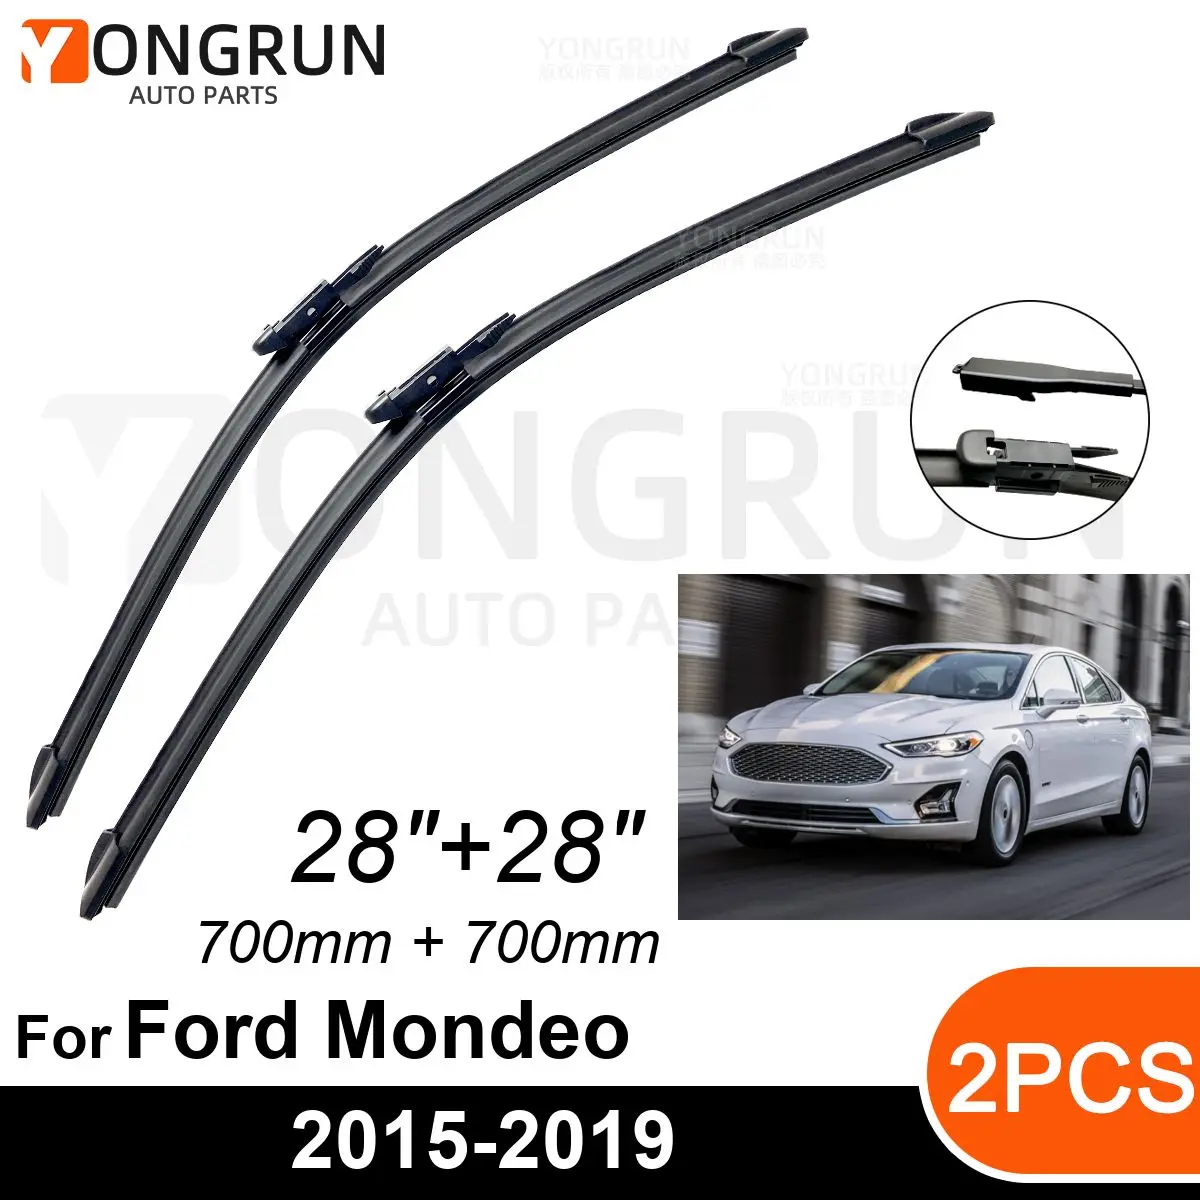 

Car Front Windshield Wipers For Ford Mondeo Fusion 2015-2019 Wiper Blade Rubber 28"+28" Car Windshield Windscreen